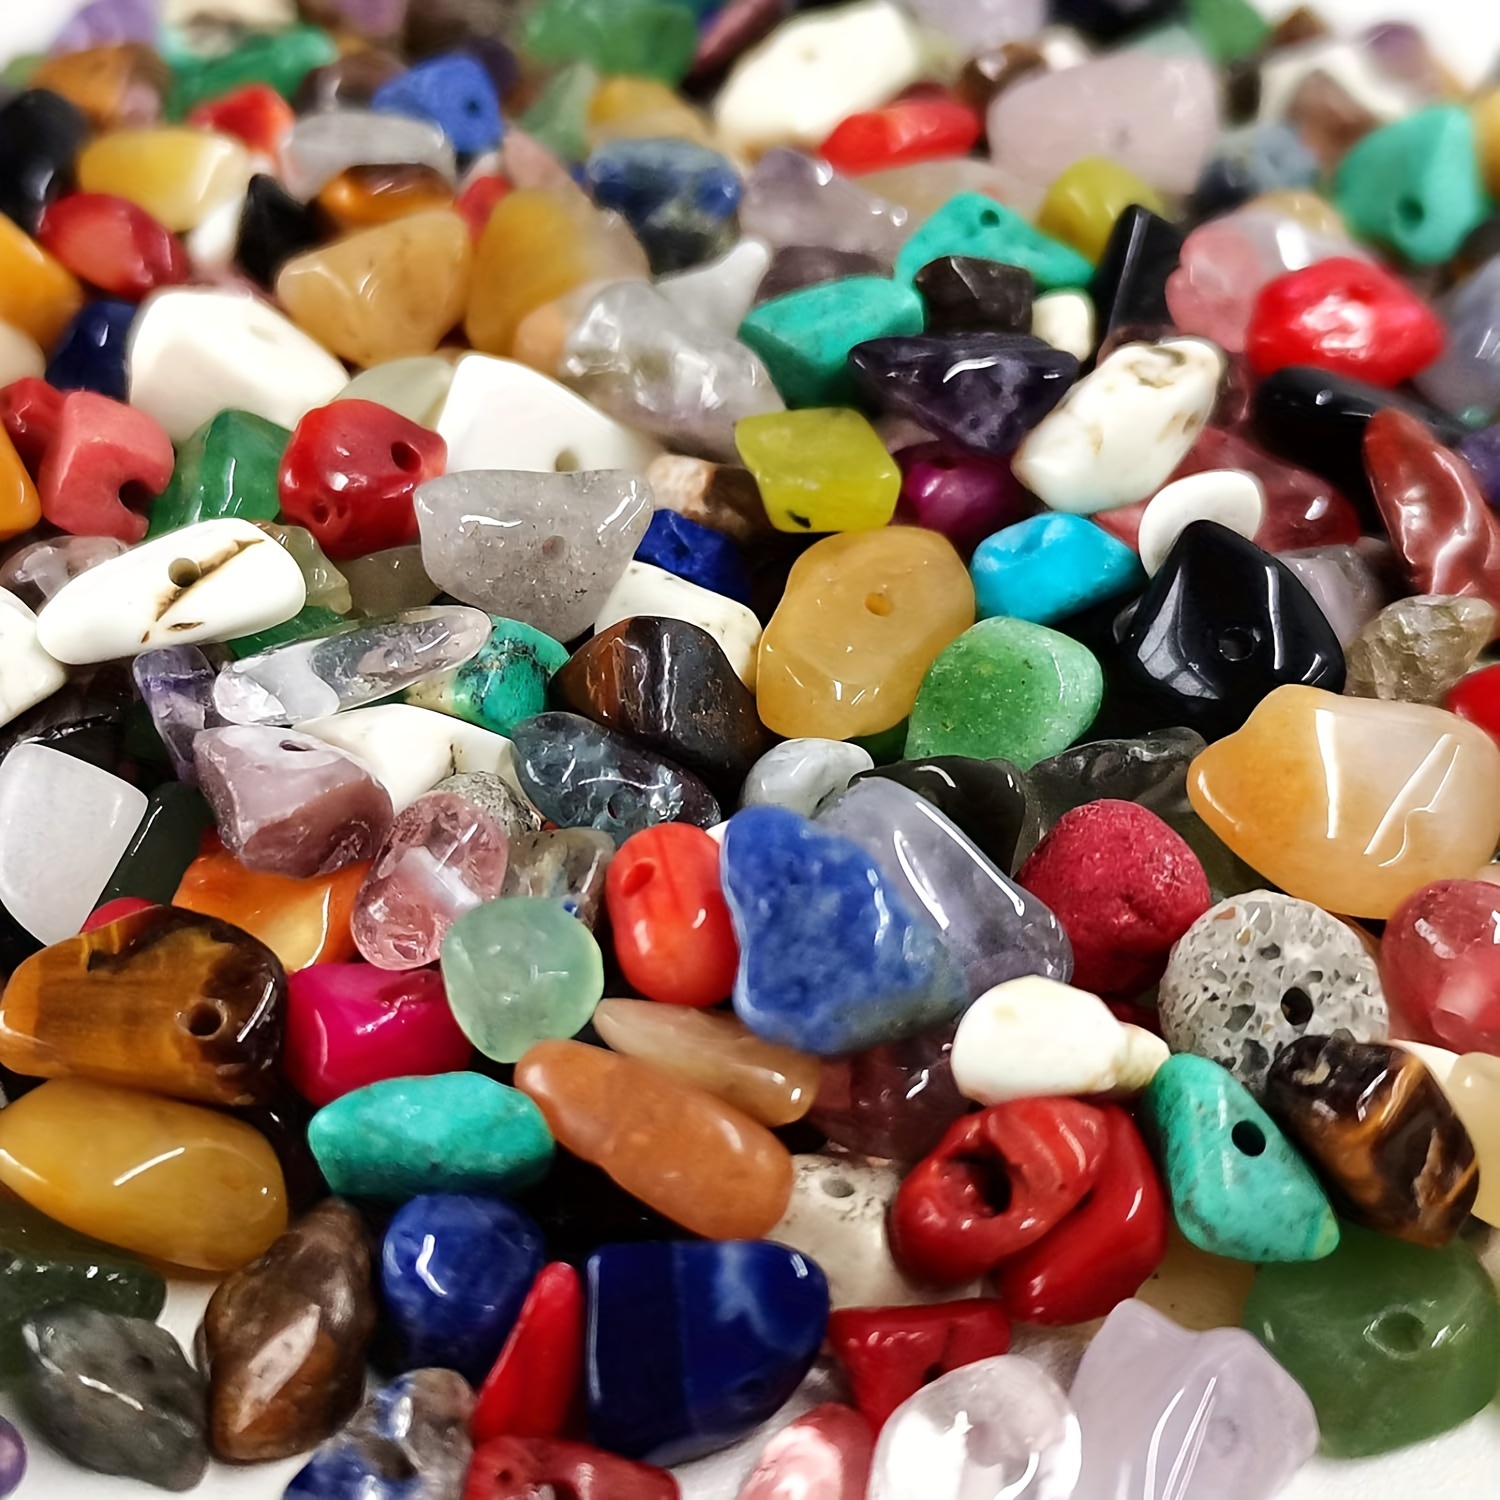 

500pcs 5-8mm Natural Chip Stone Beads Multicolor Irregular Crystal Loose Rocks Beads Hole Drilled For Diy Bracelet Necklace Earrings Jewelry Making Craft Supplies